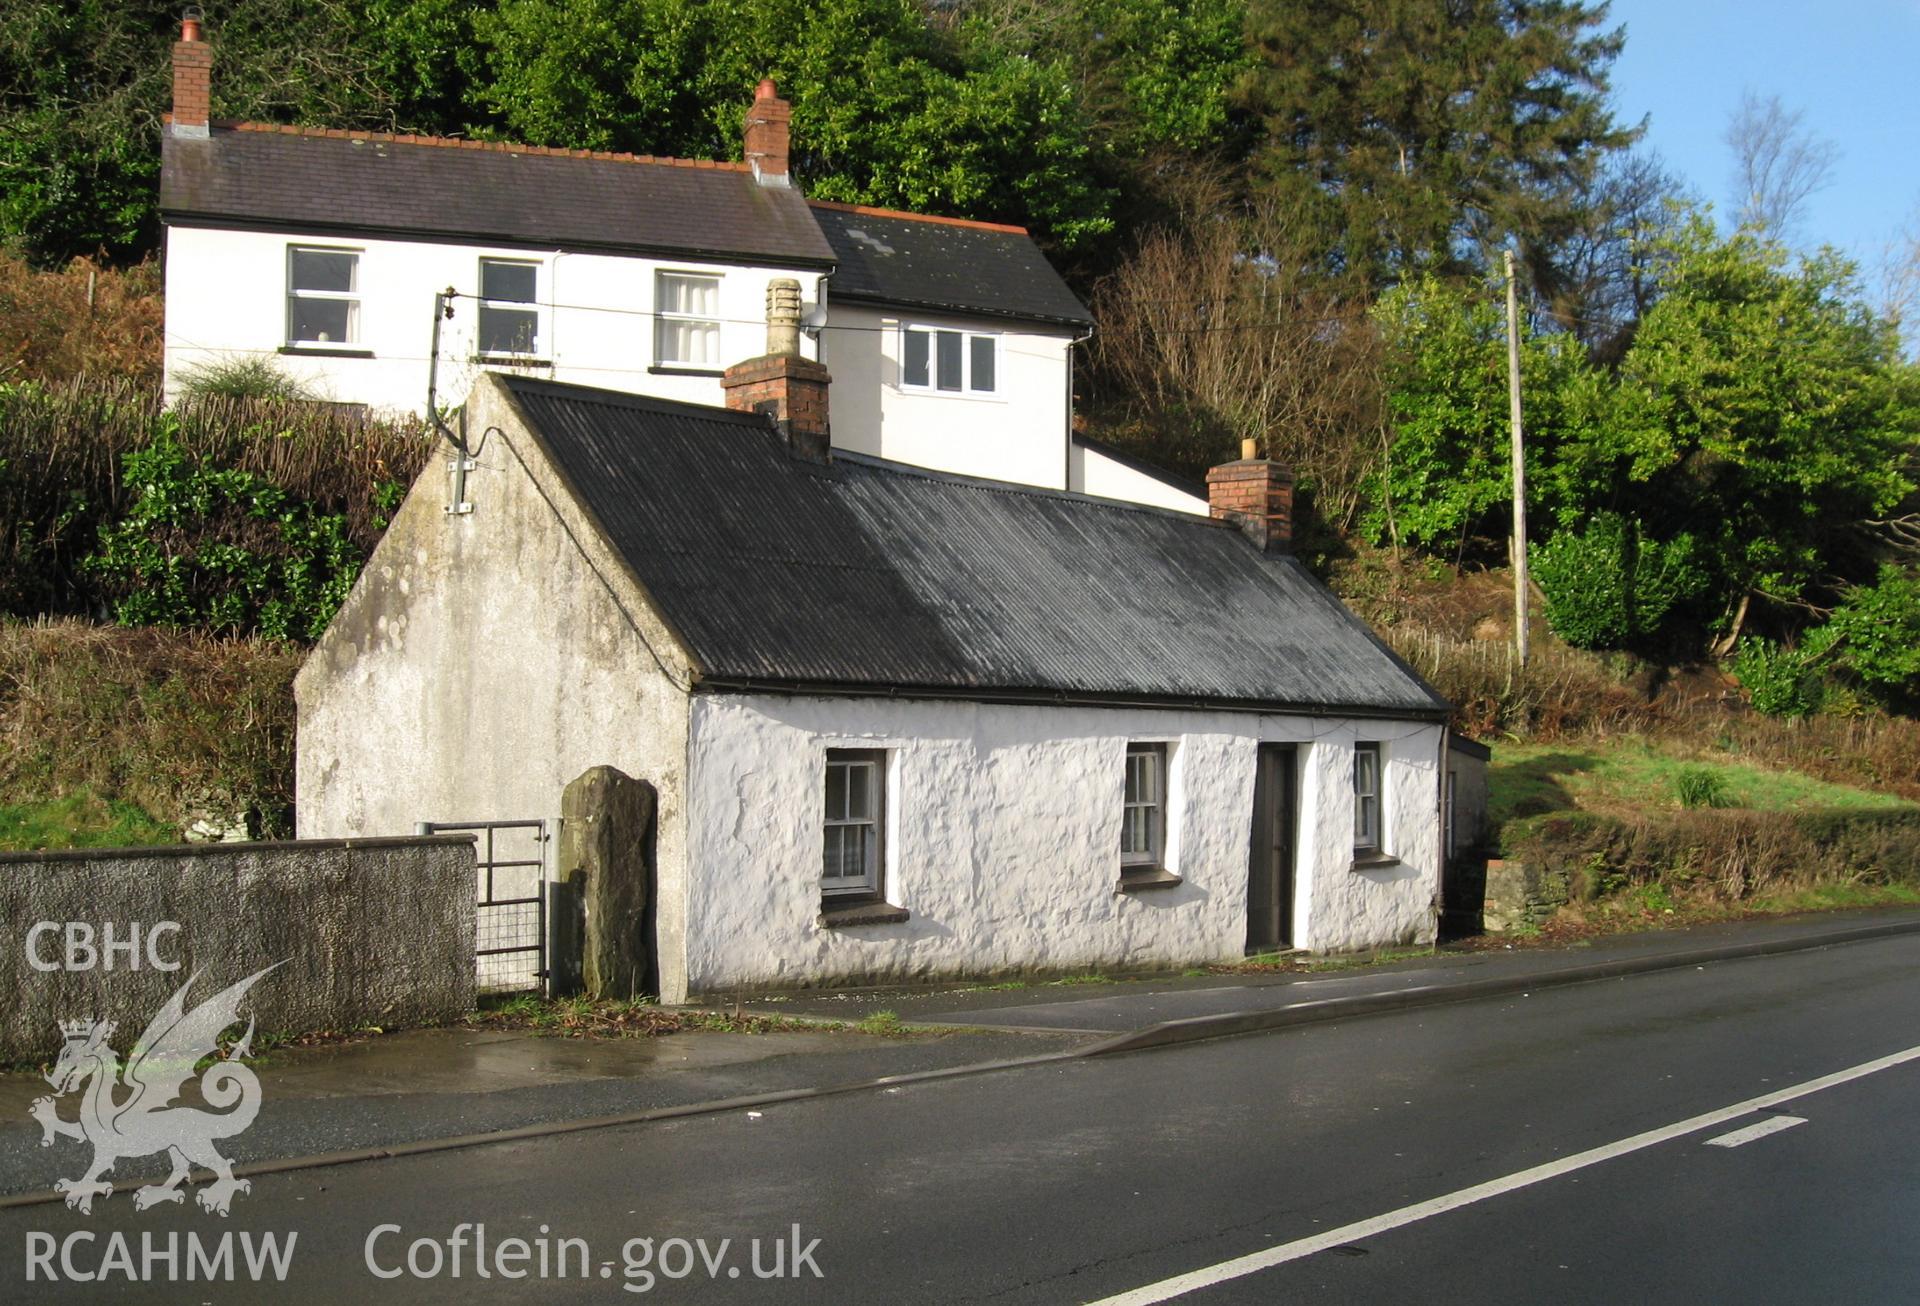 Colour photo showing Talfan Cottage, Llanddowror, taken by Paul R. Davis and dated 1st January 1980.